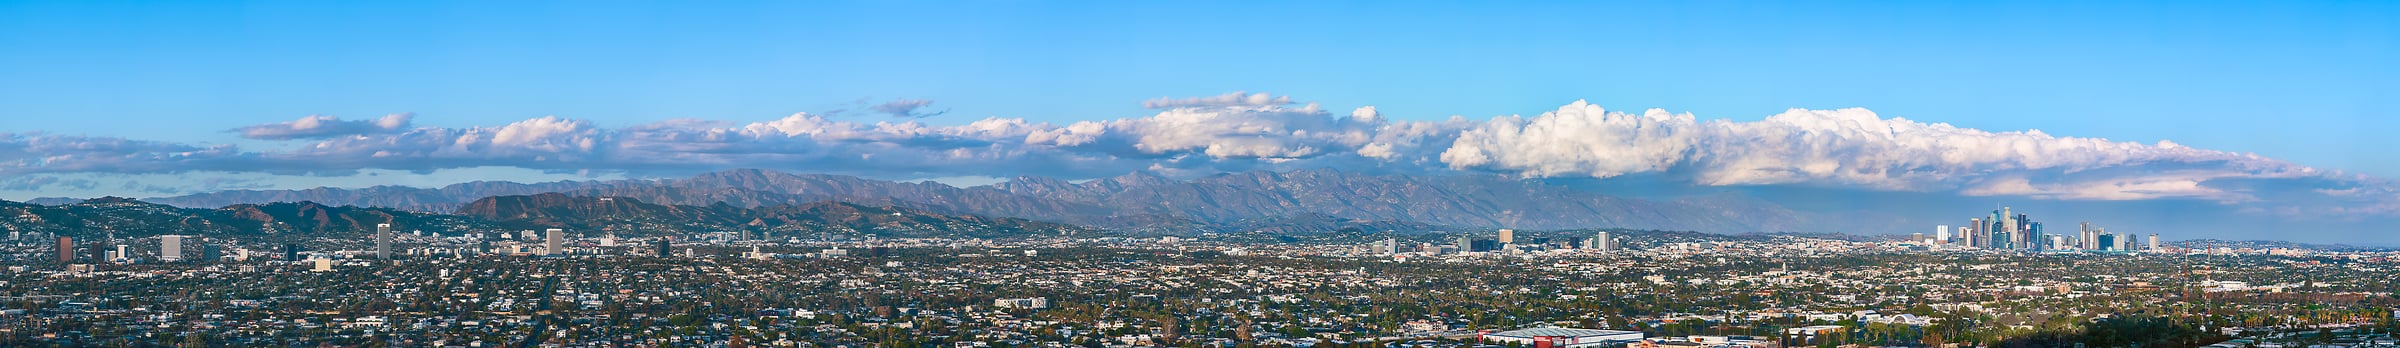 548 megapixels! A huge, very high resolution, panorama of Los Angeles; photograph created by Jim Tarpo from Ladera Heights, Los Angeles, California.